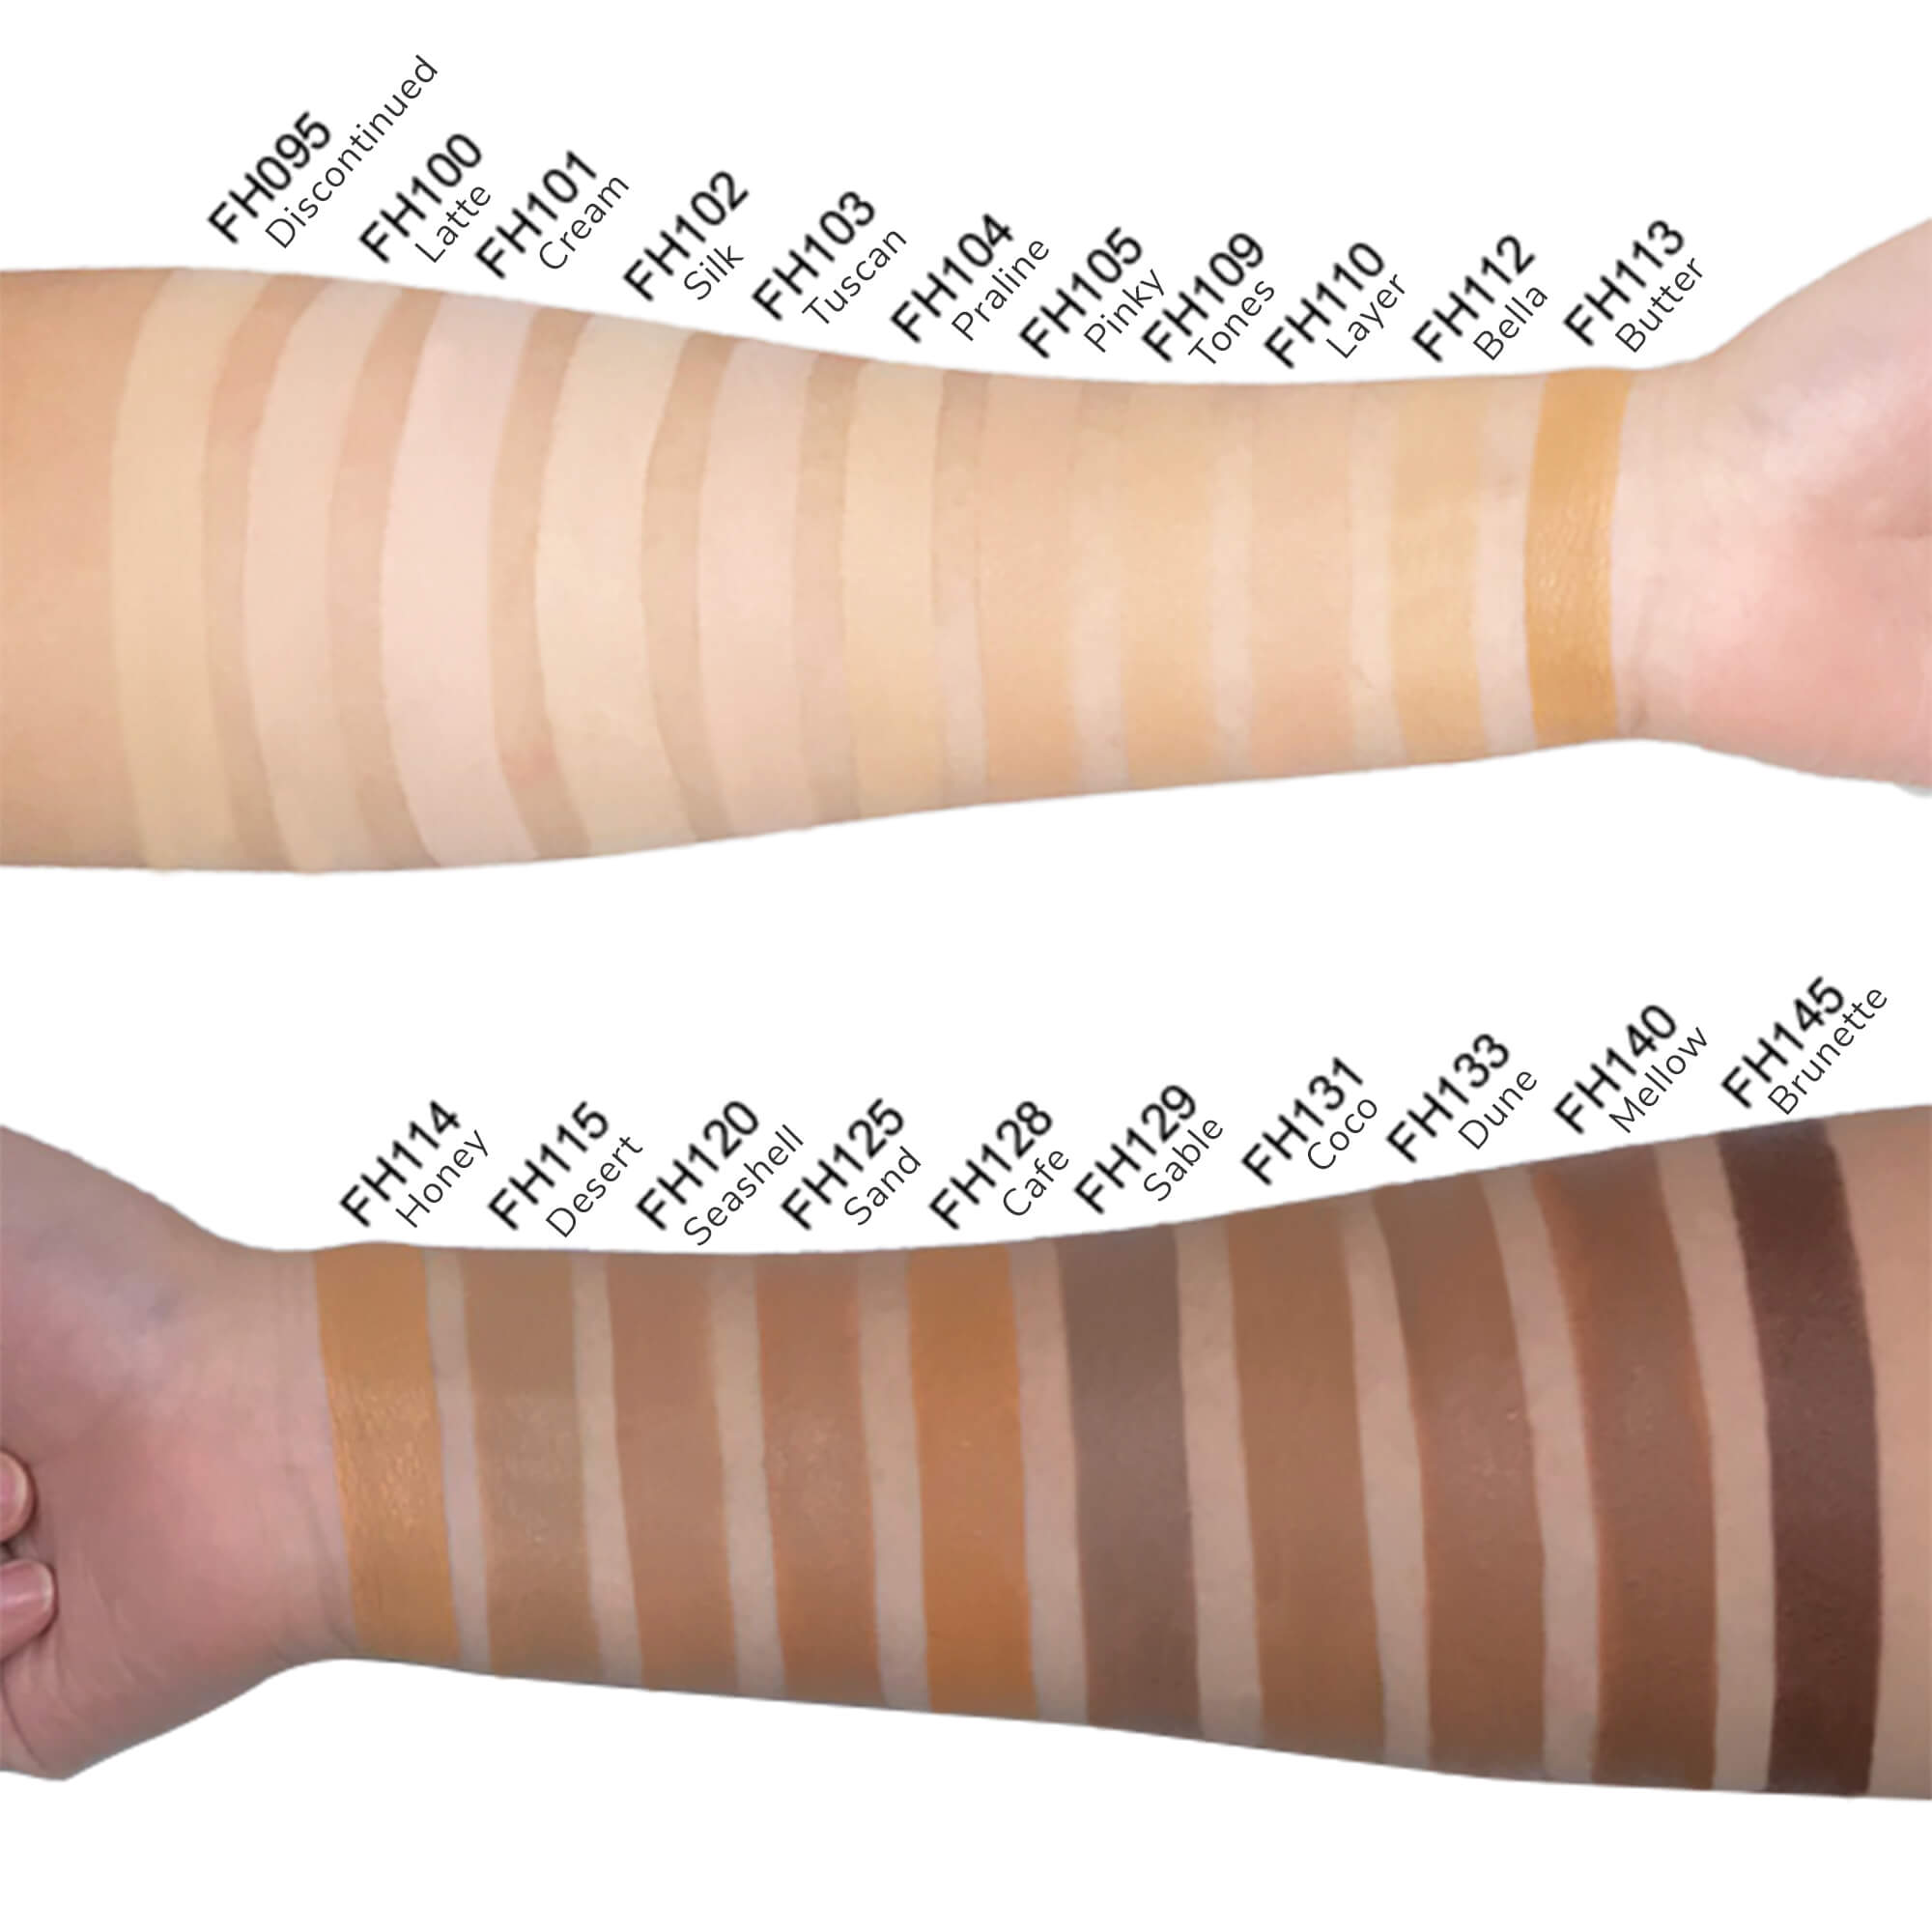 full cover foundation shades